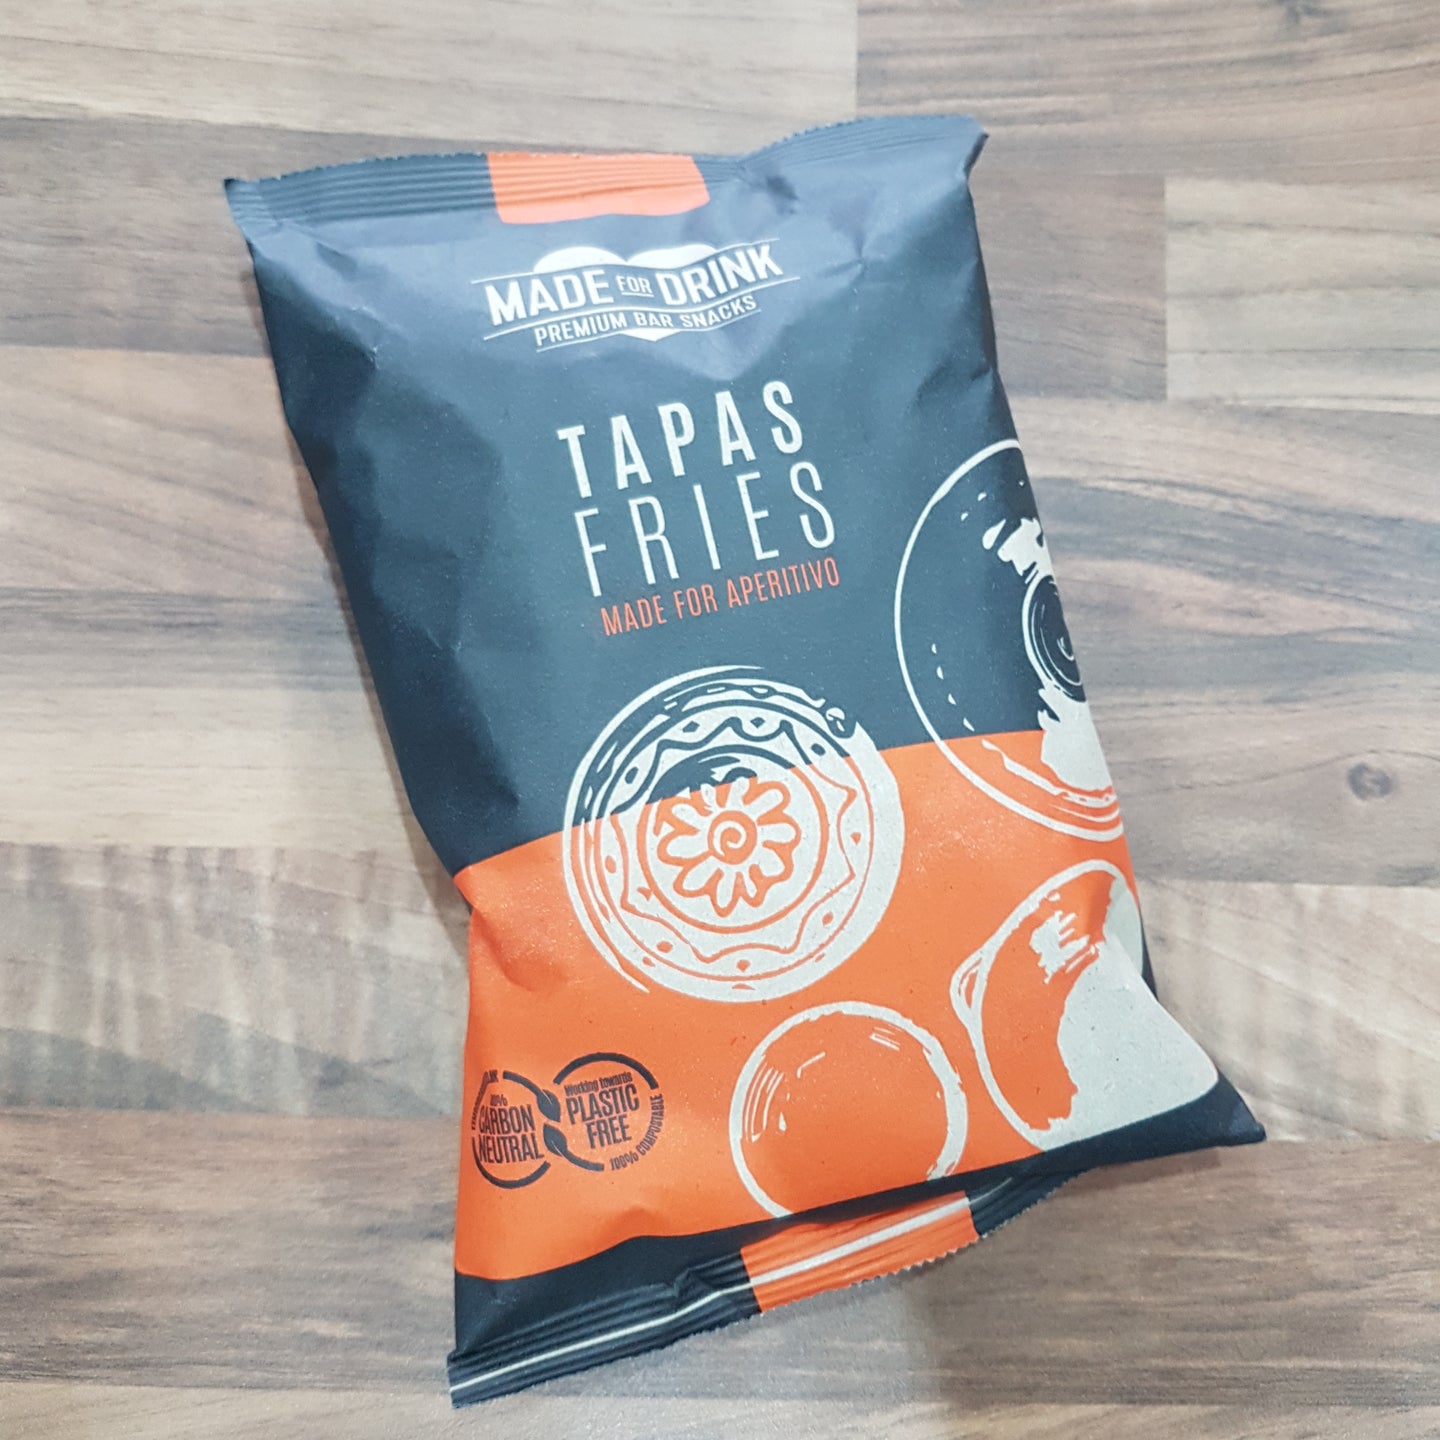 Made for Drink Tapas Fries 150g